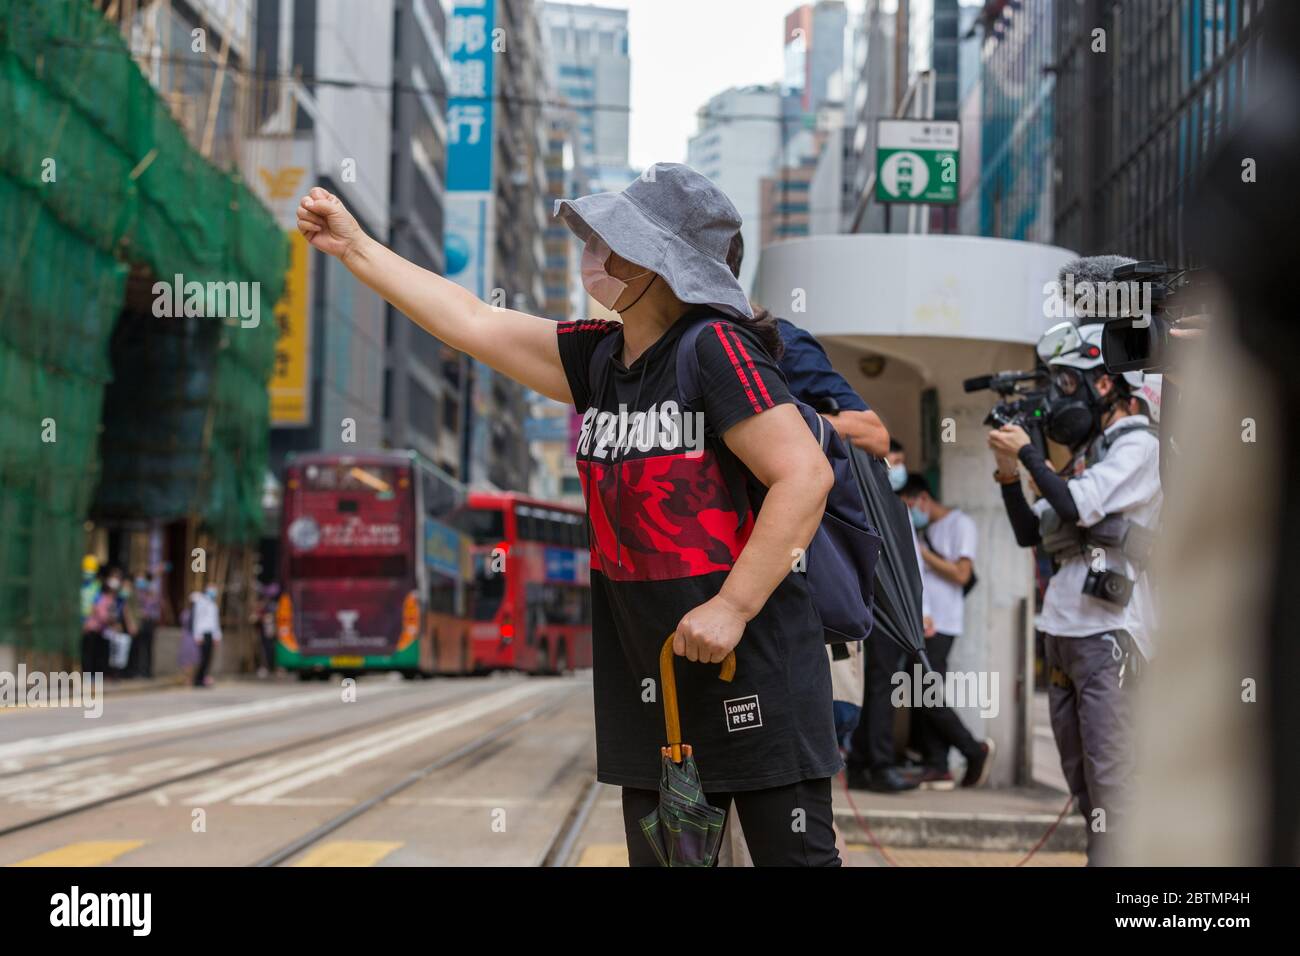 Central, Hong Kong. 27 May, 2020 Hong Kong Protest Anti-National Anthem Law. Woman arguing with the Police. Credit: David Ogg / Alamy Live News Stock Photo